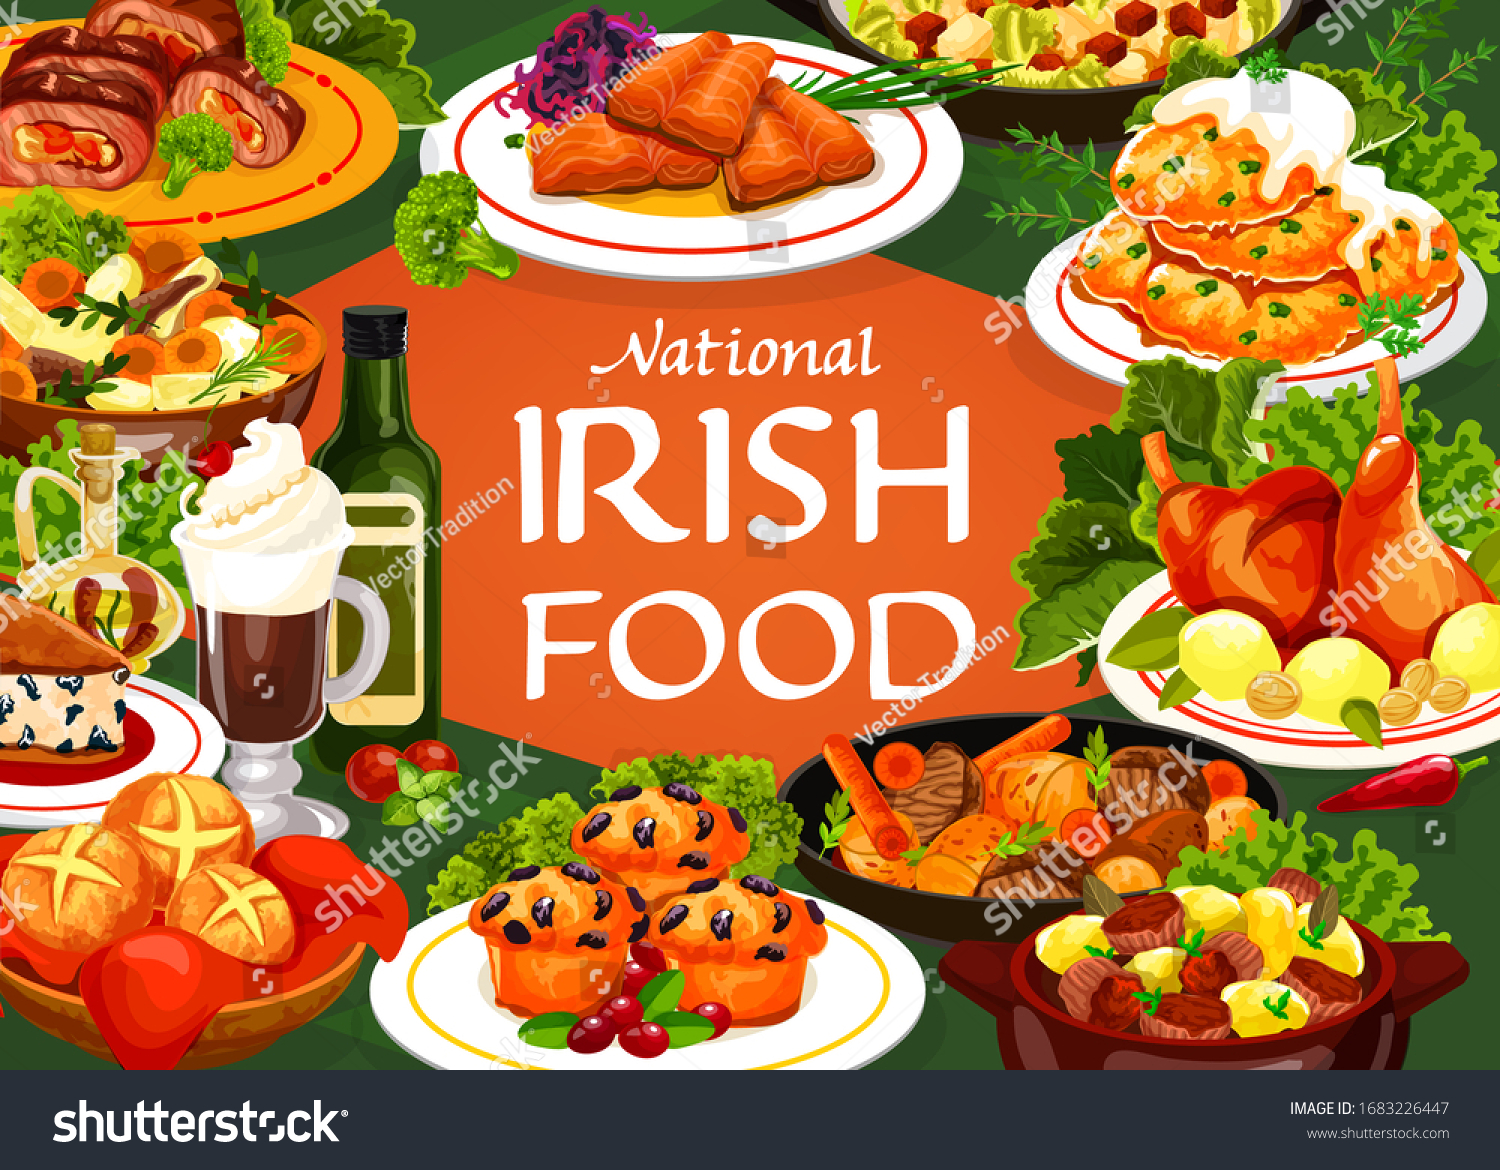 SVG of Irish cuisine food vector meal of meat, vegetable and fish with bread. Potato pancakes, irish stews with beef, lamb and rabbit, soda bread and berry cupcake, salmon with cabbage salad and colcannon svg